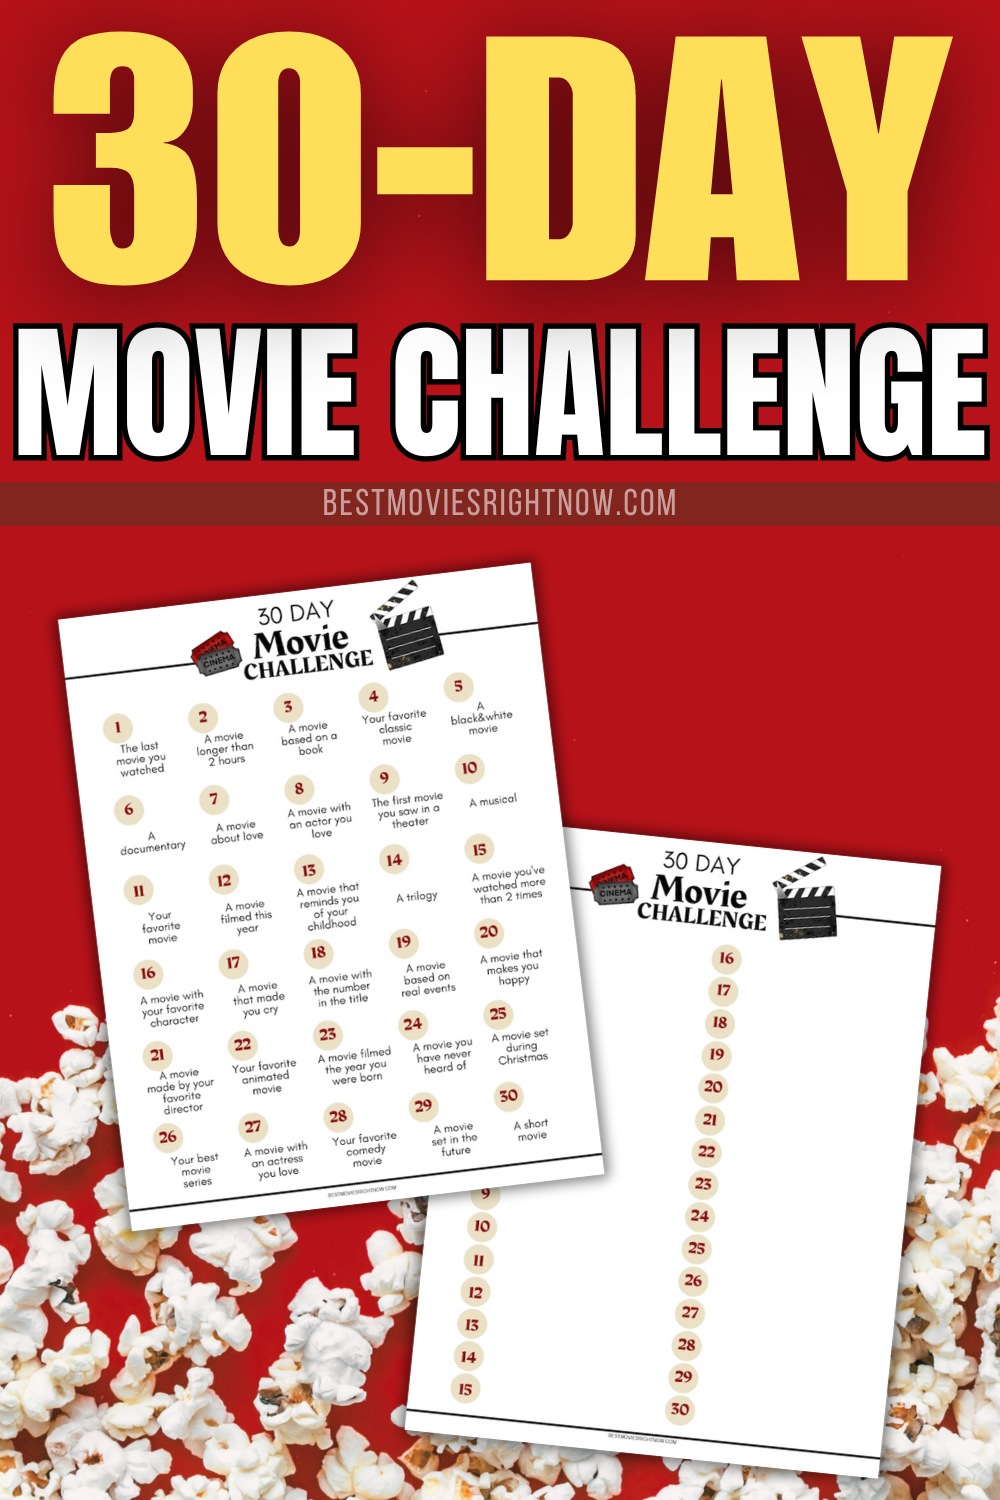 a pin size image of 30-movie challenge showing the pages of the printable with text